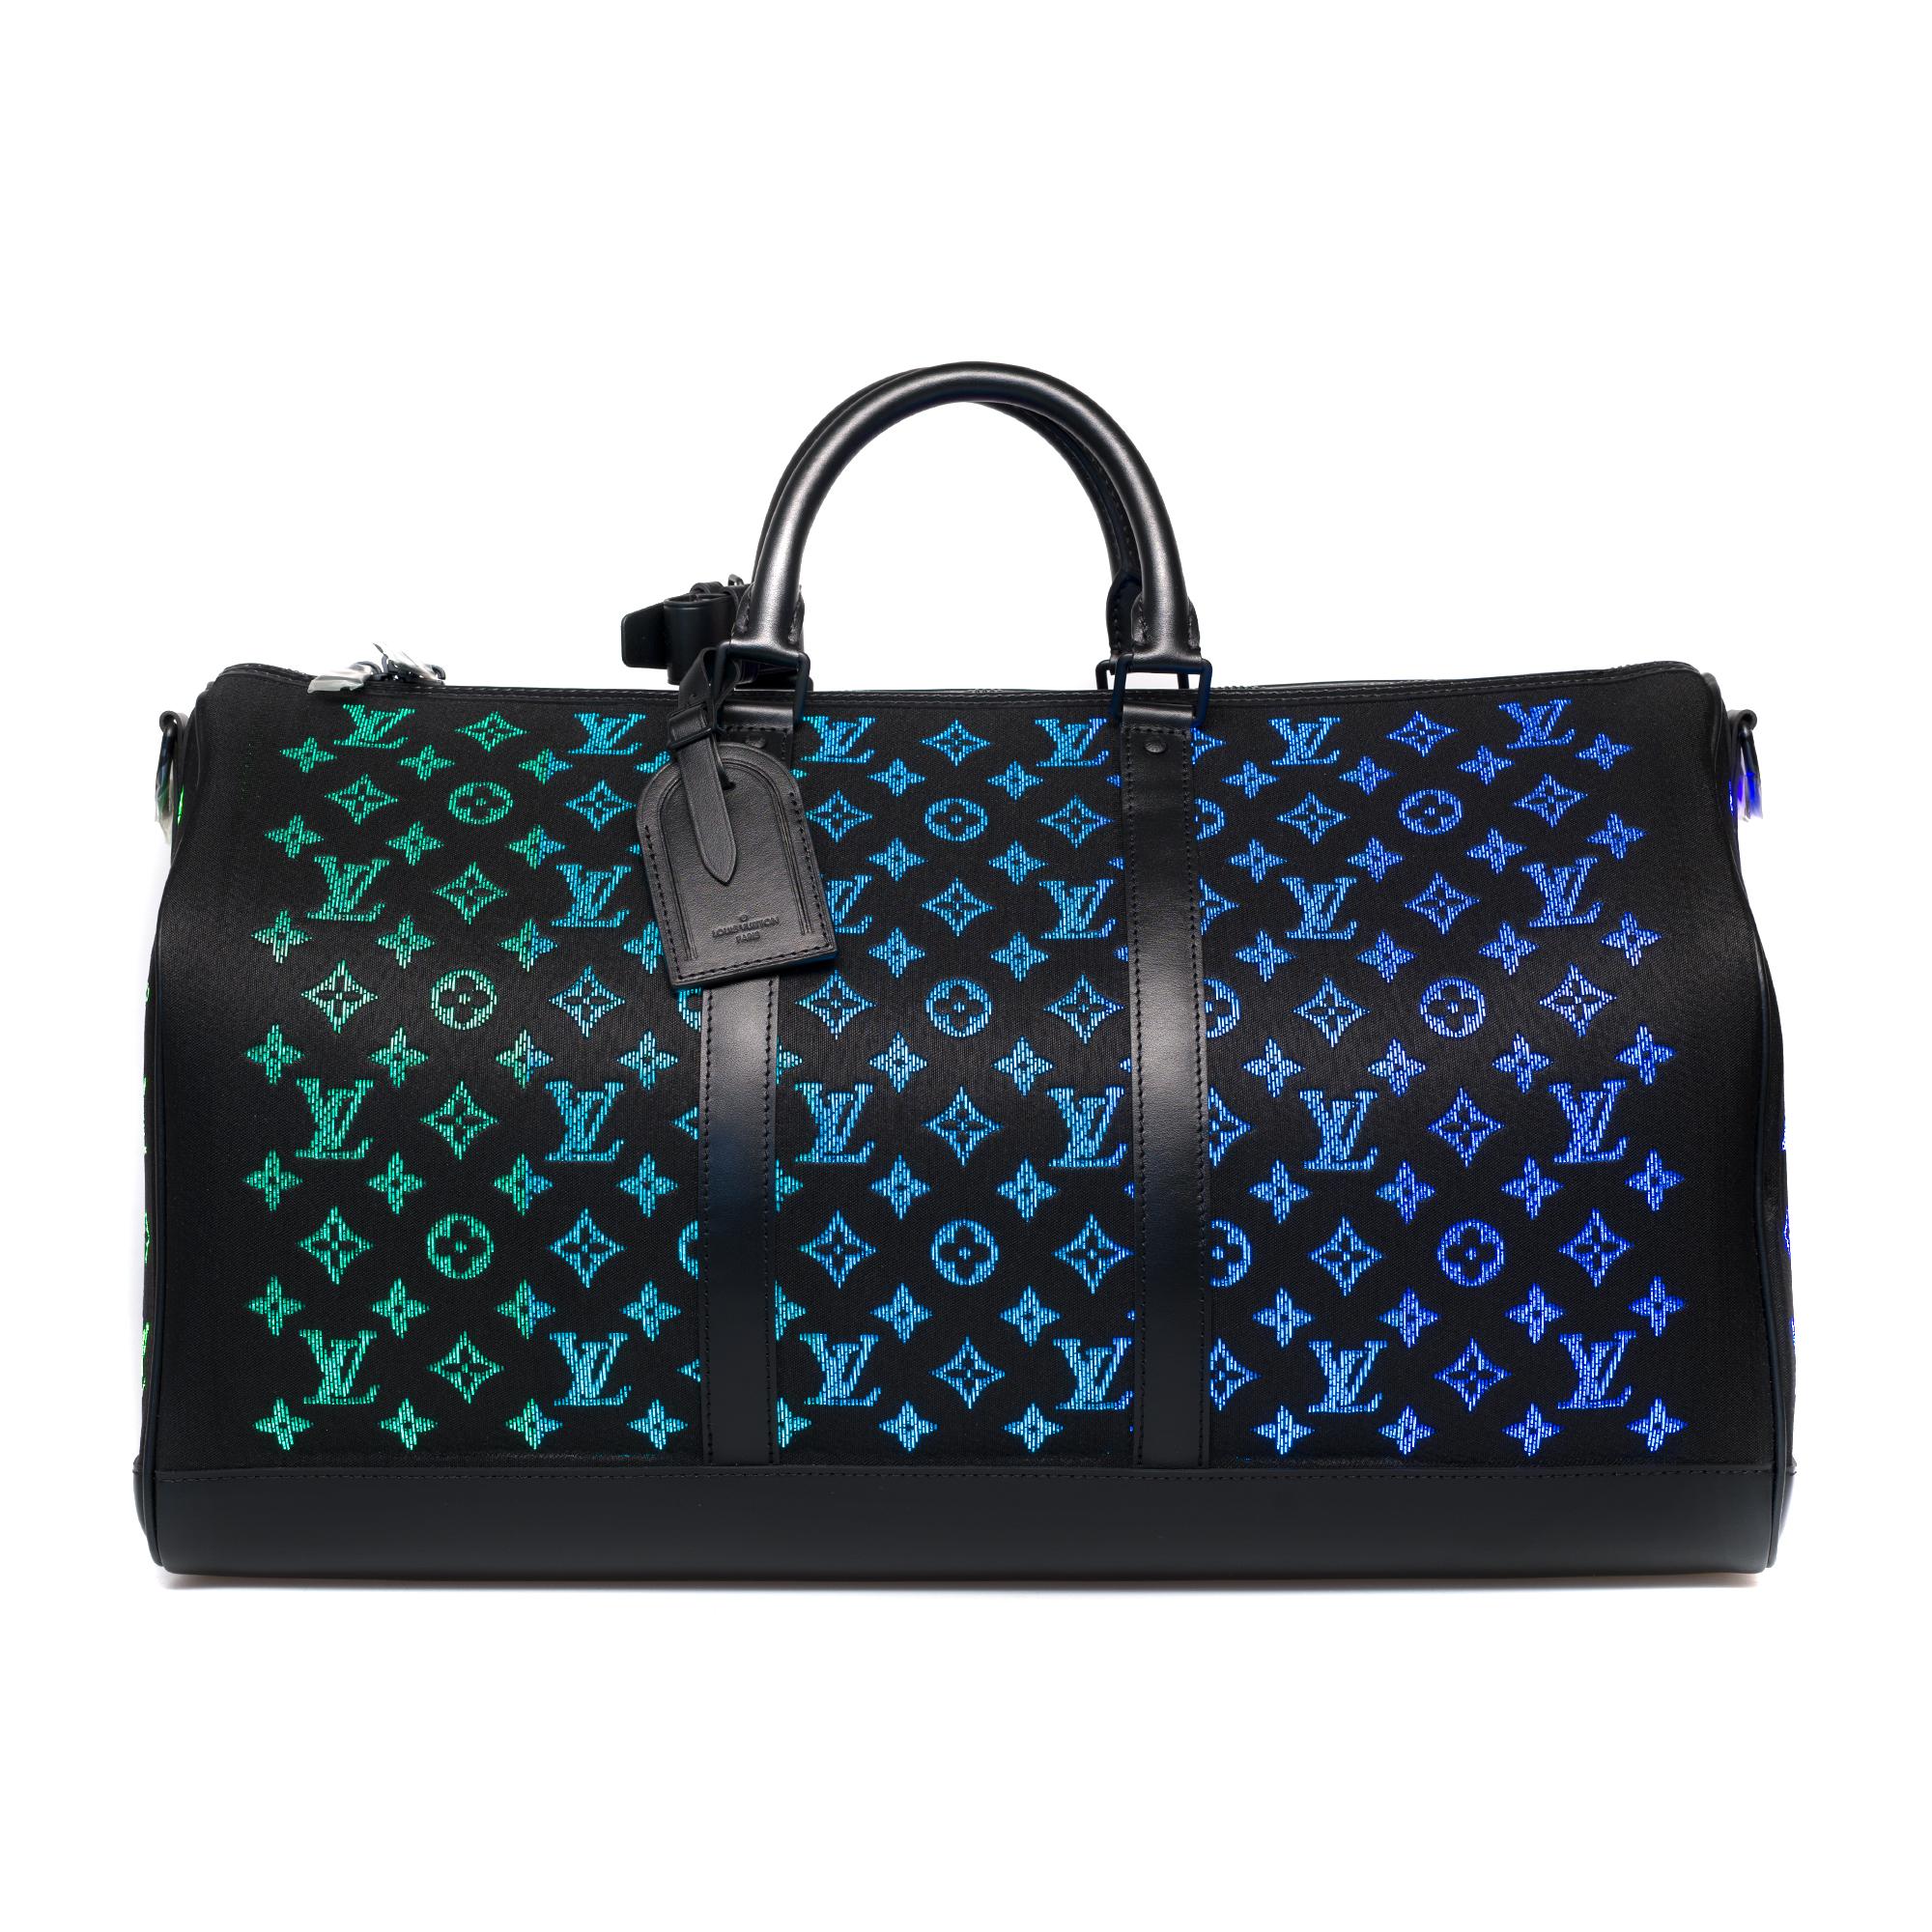 ULTRA LIMITED EDITION - SOLD OUT -MEN FASHION SHOW Fall-Winter 2019

Virgil Abloh presents this Keepall Shoulder Bag 50 Light Up that lights up in the dark. A masterful reinterpretation of the House’s classic travel bag, this model illuminates to